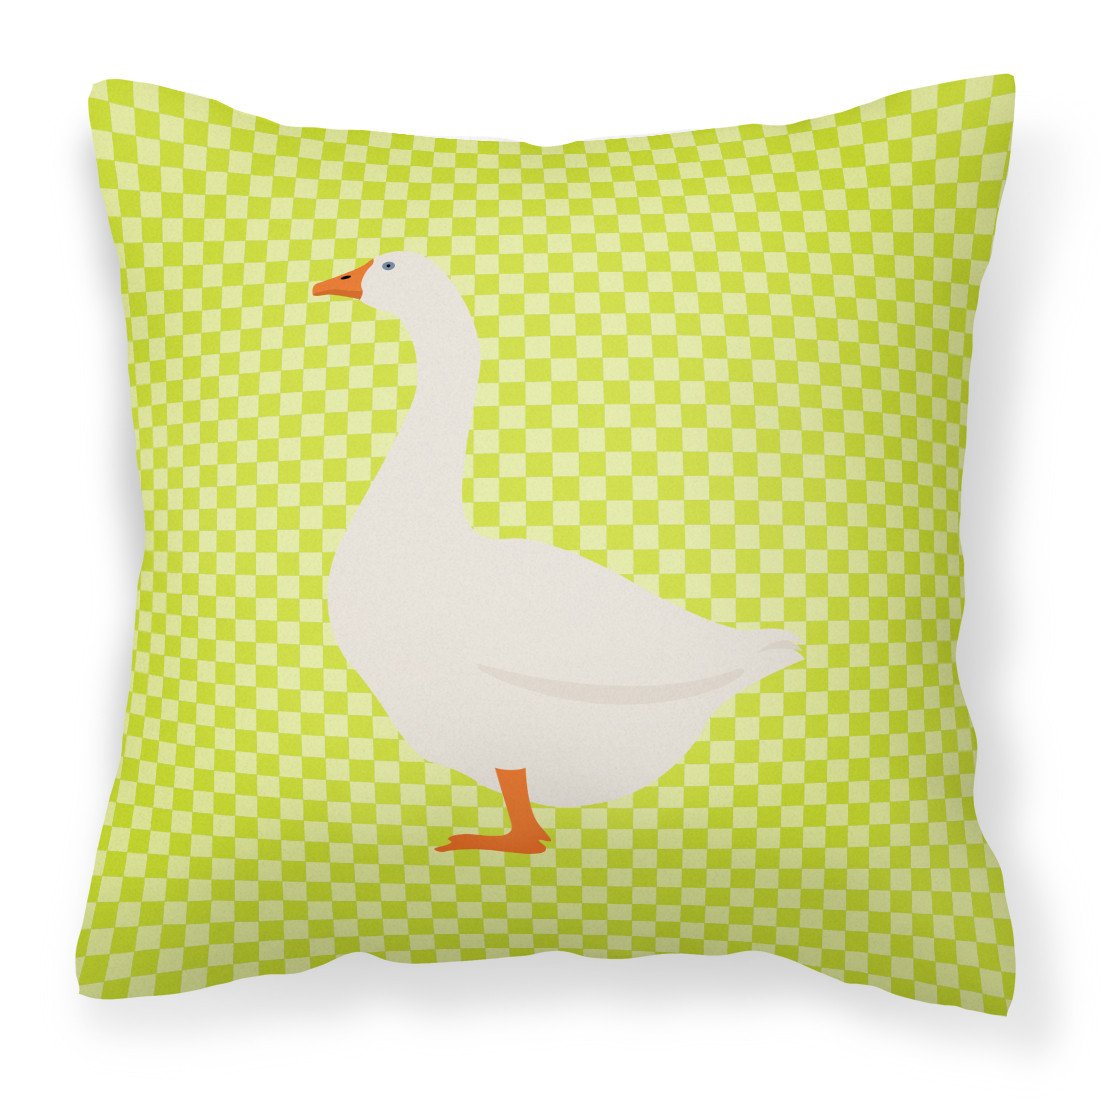 Embden Goose Green Fabric Decorative Pillow BB7718PW1818 by Caroline's Treasures